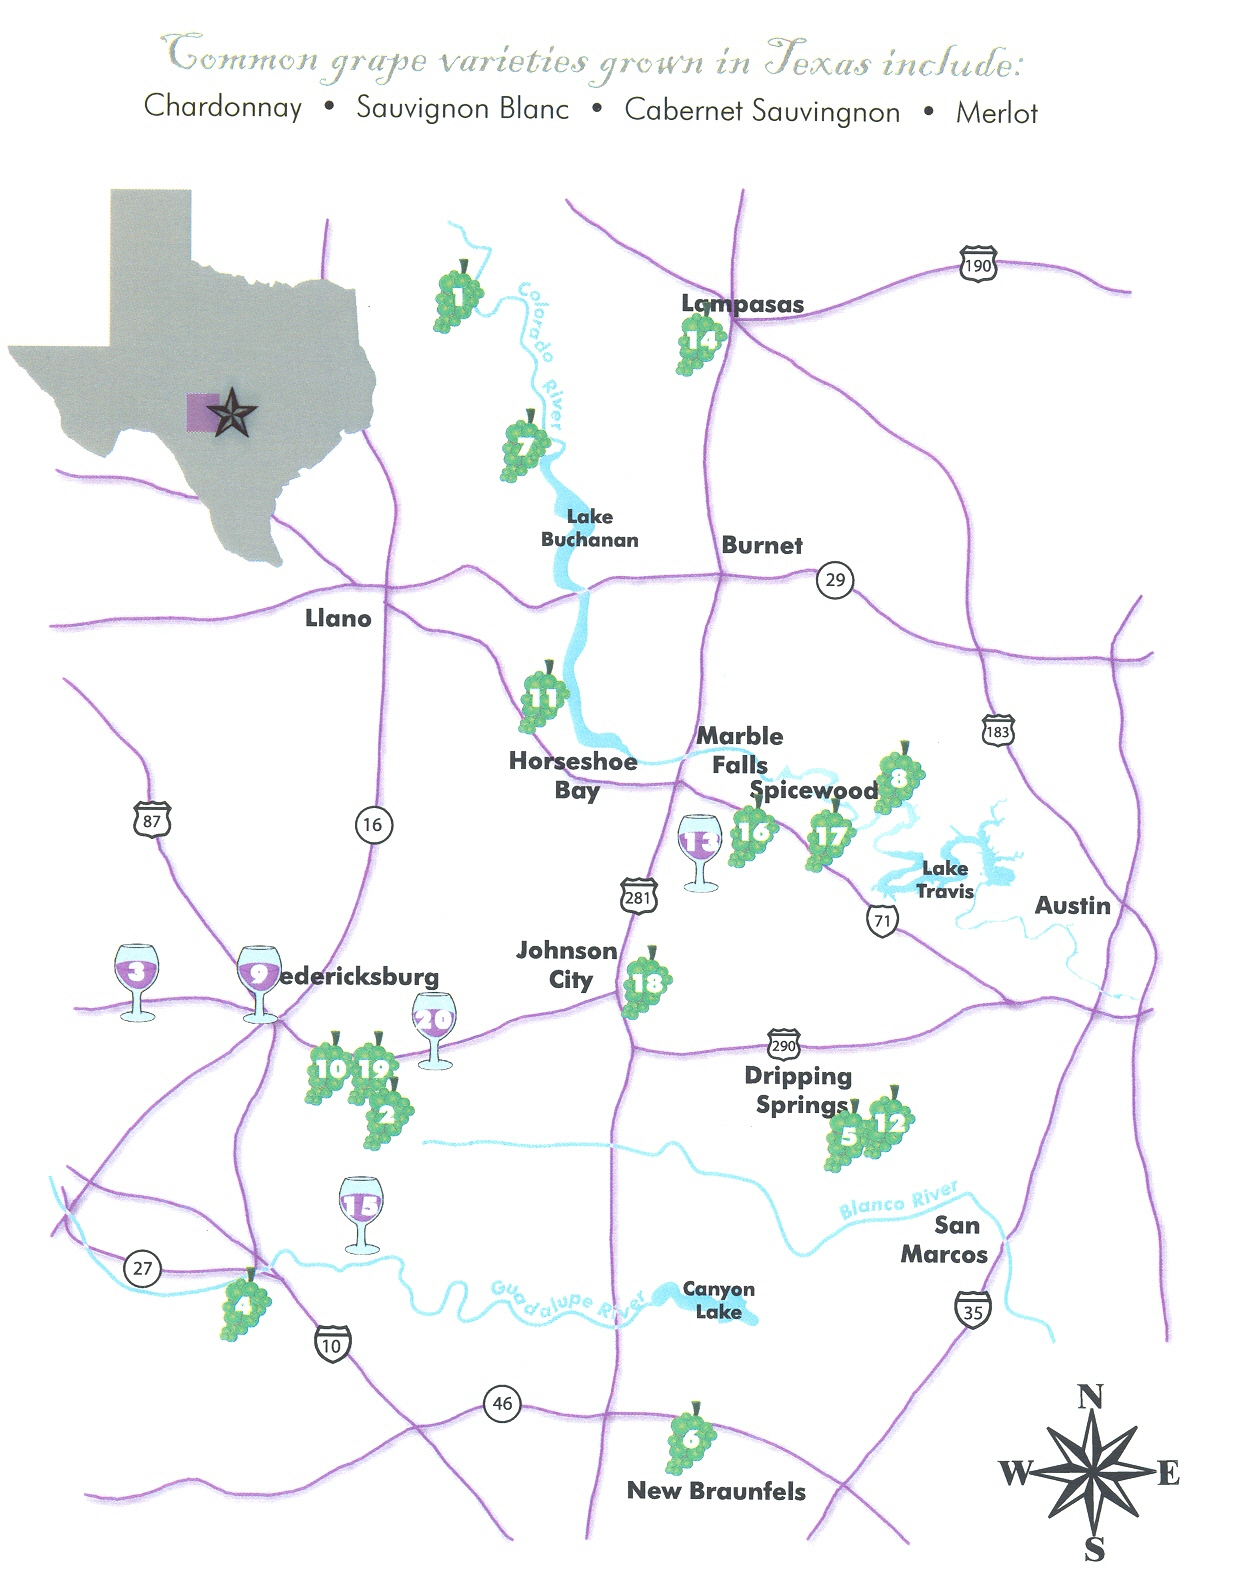 Texas Hill Country Vineyards &amp;amp; Wineries - Texas Winery Map